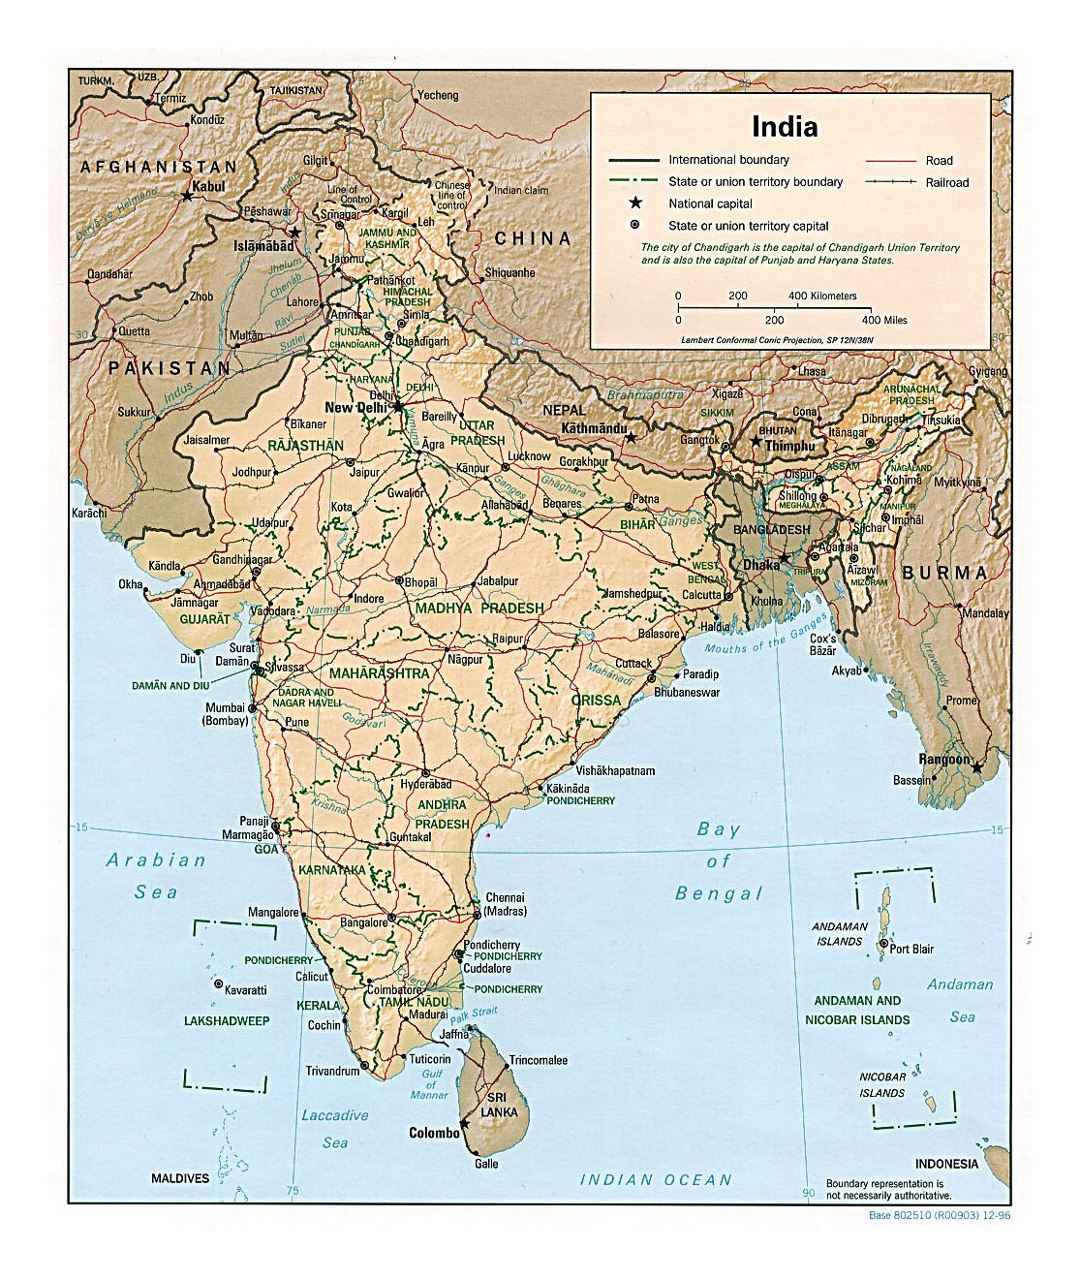 Detailed political and administrative map of India with relief, roads, railroads and cities - 1996